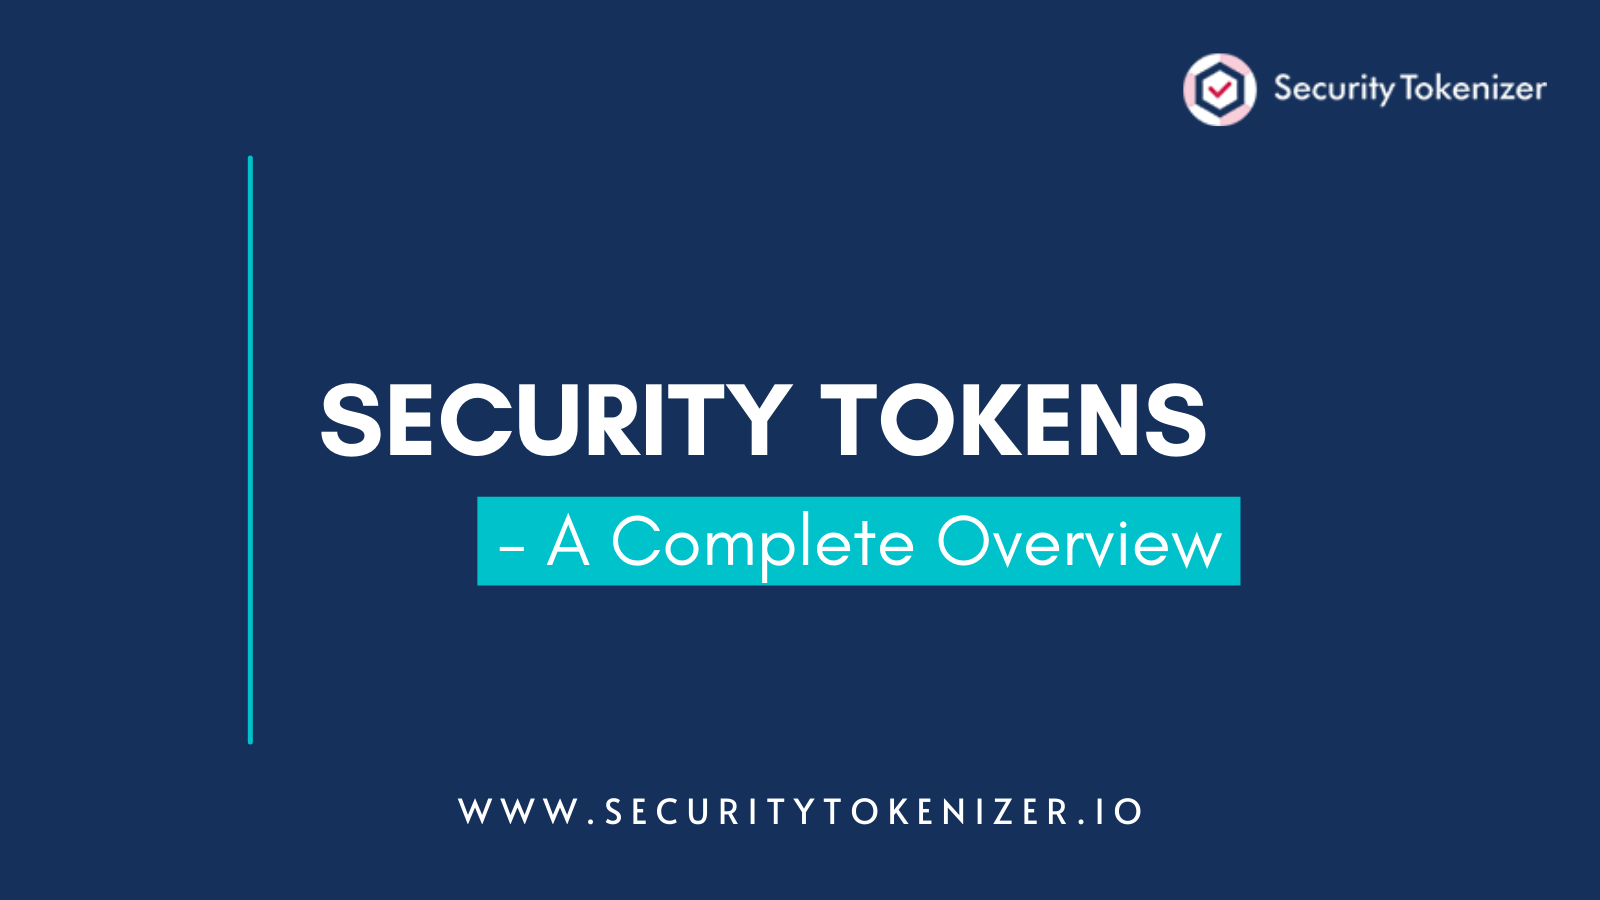 What Are Security Tokens - A Complete Overview